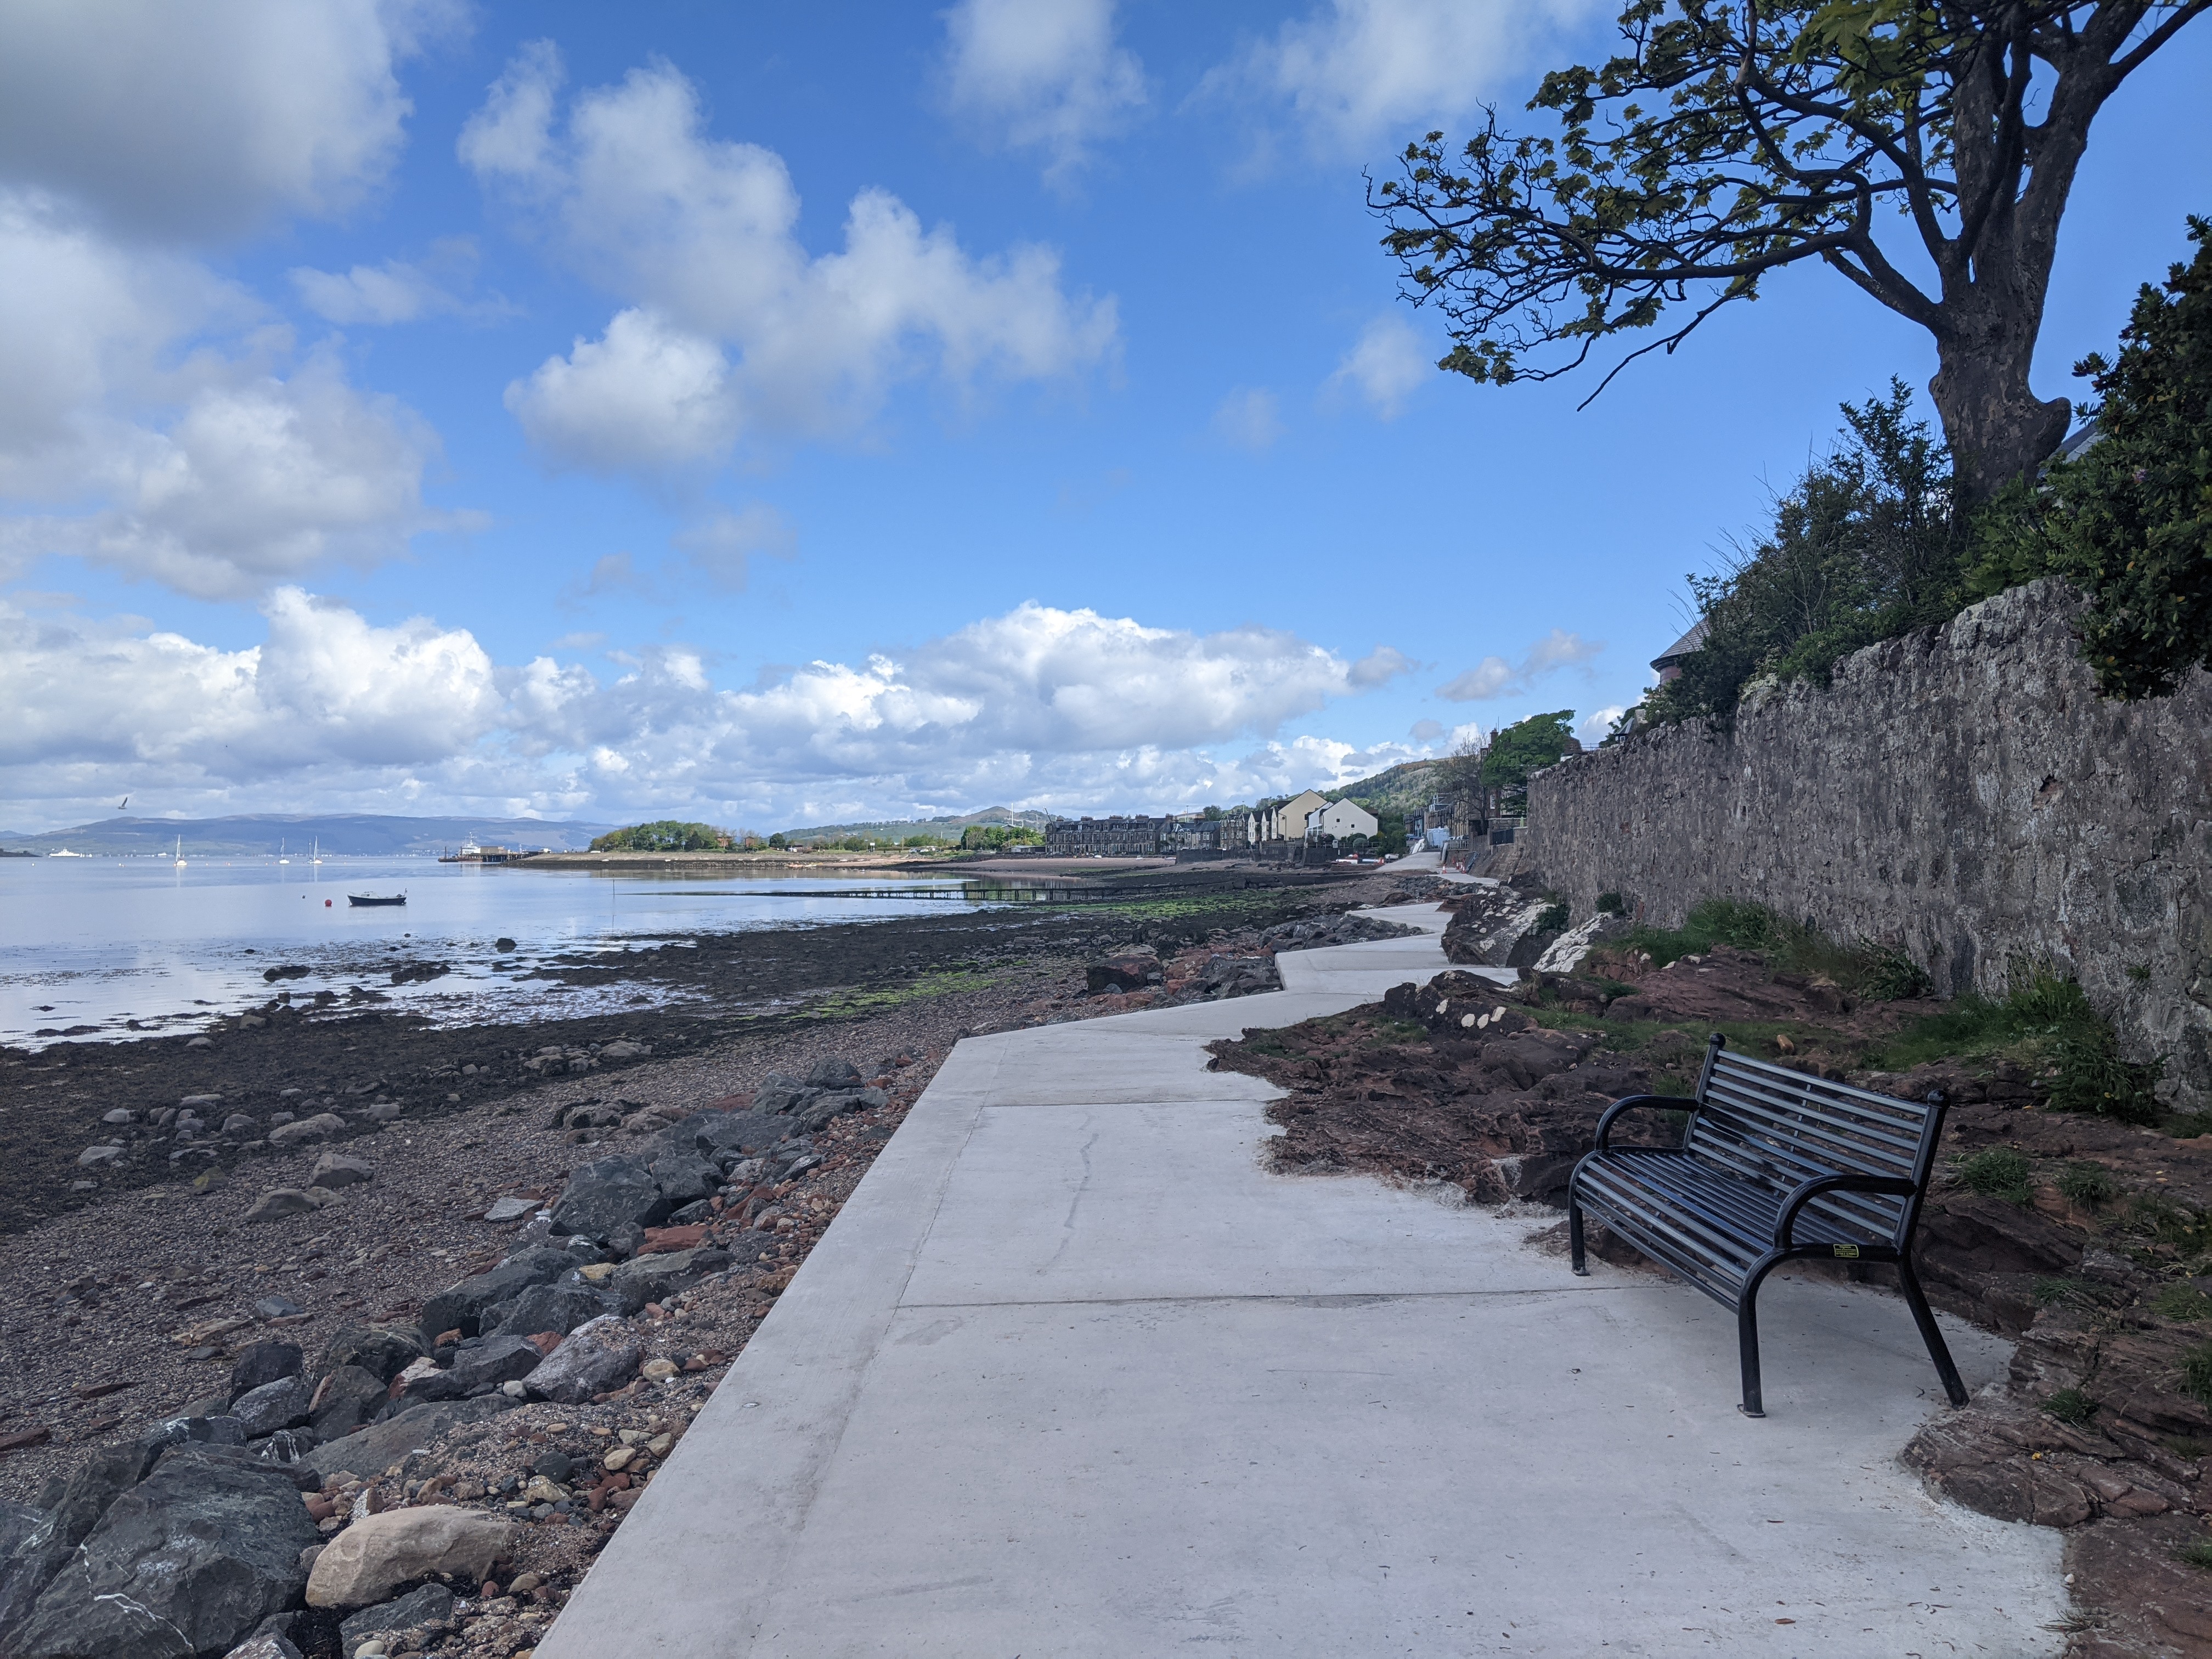 Fairlie Coastal Path on way to completion with final phase of works underway